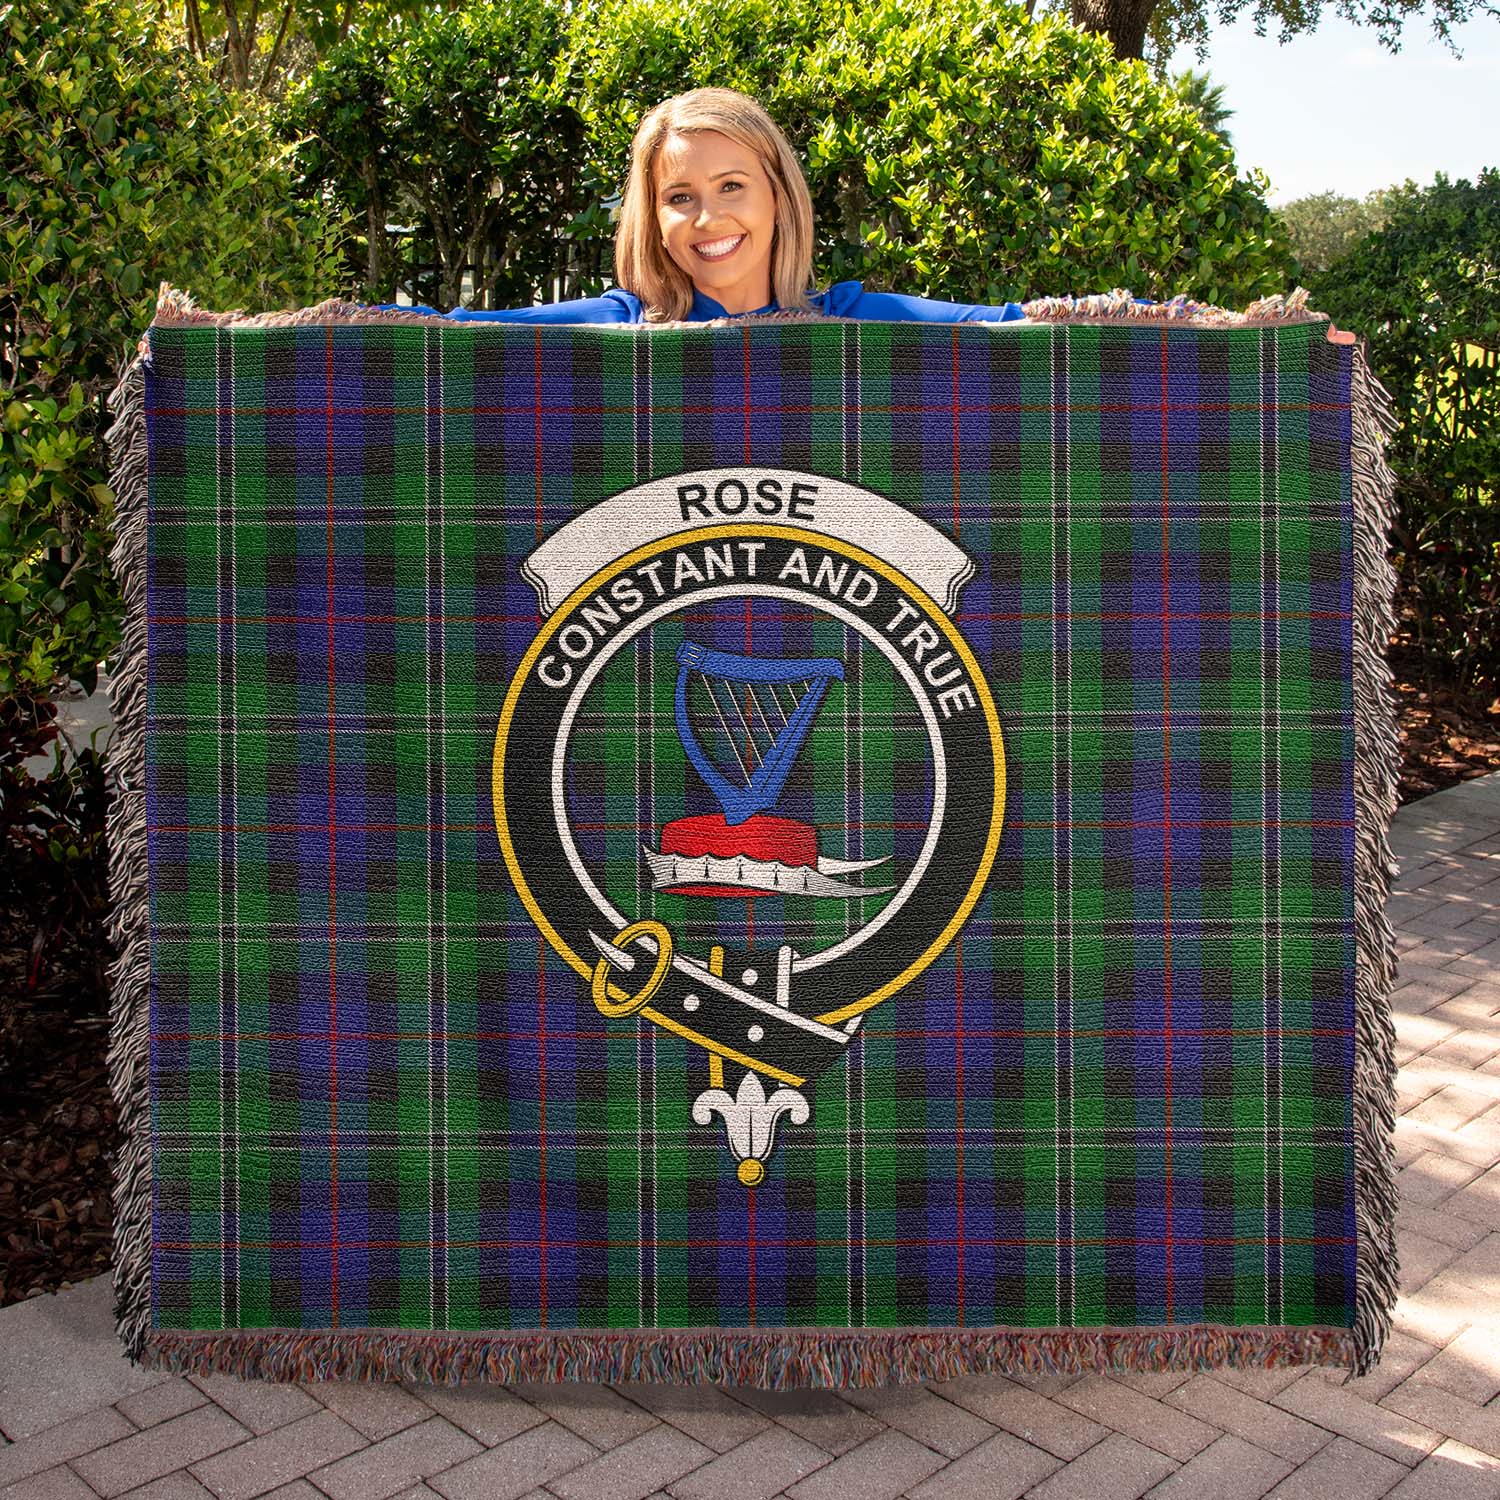 Tartan Vibes Clothing Rose Hunting Tartan Woven Blanket with Family Crest